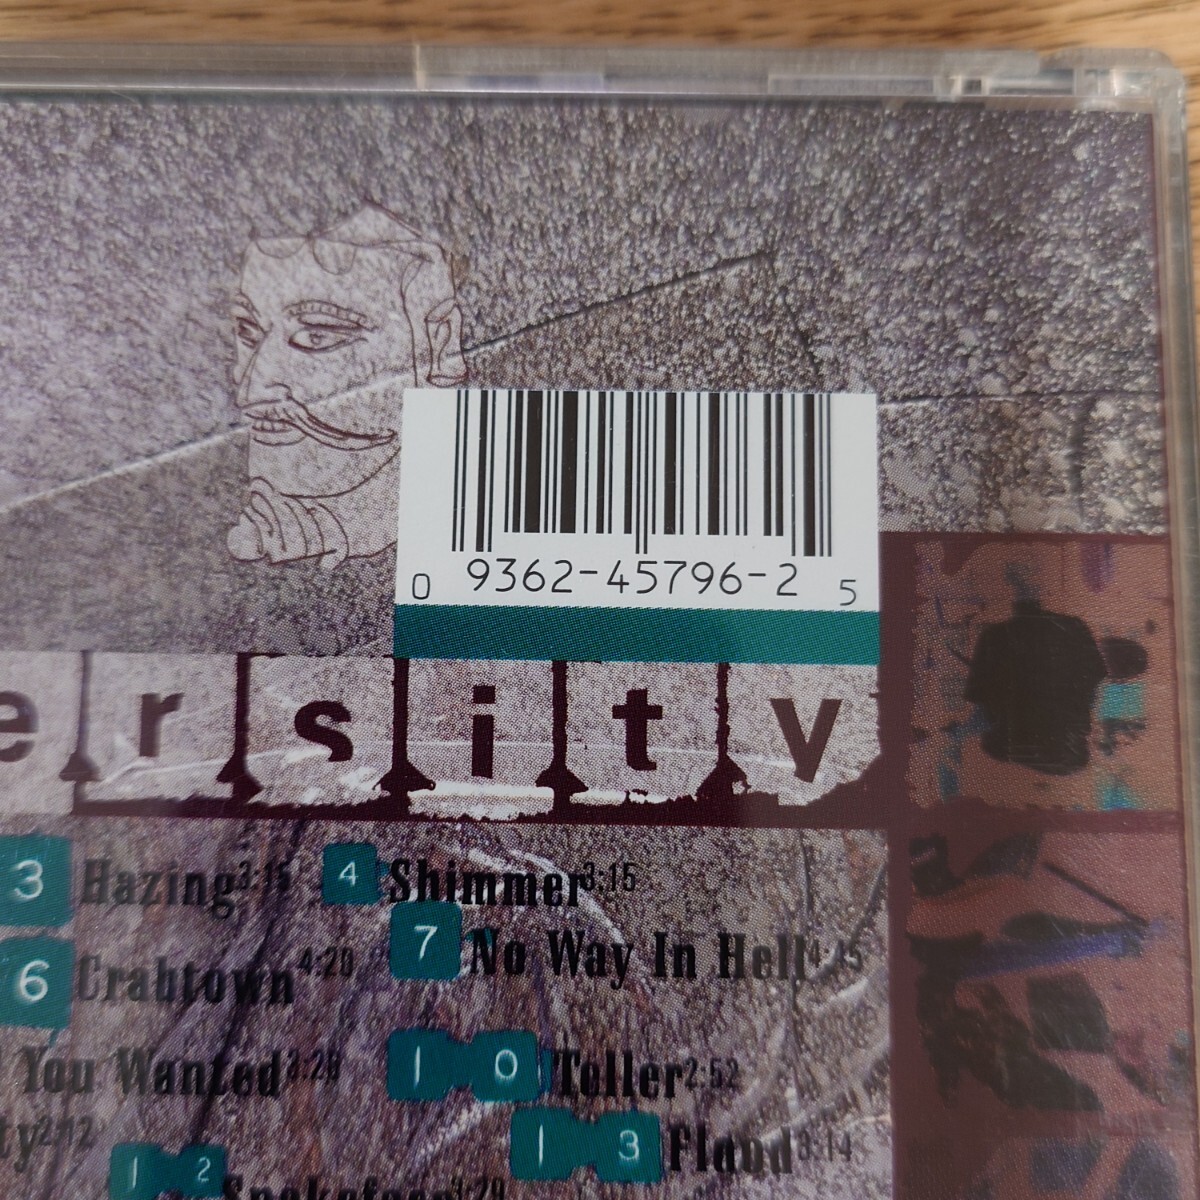 throwing muses CD university ゆに 輸入盤_画像3